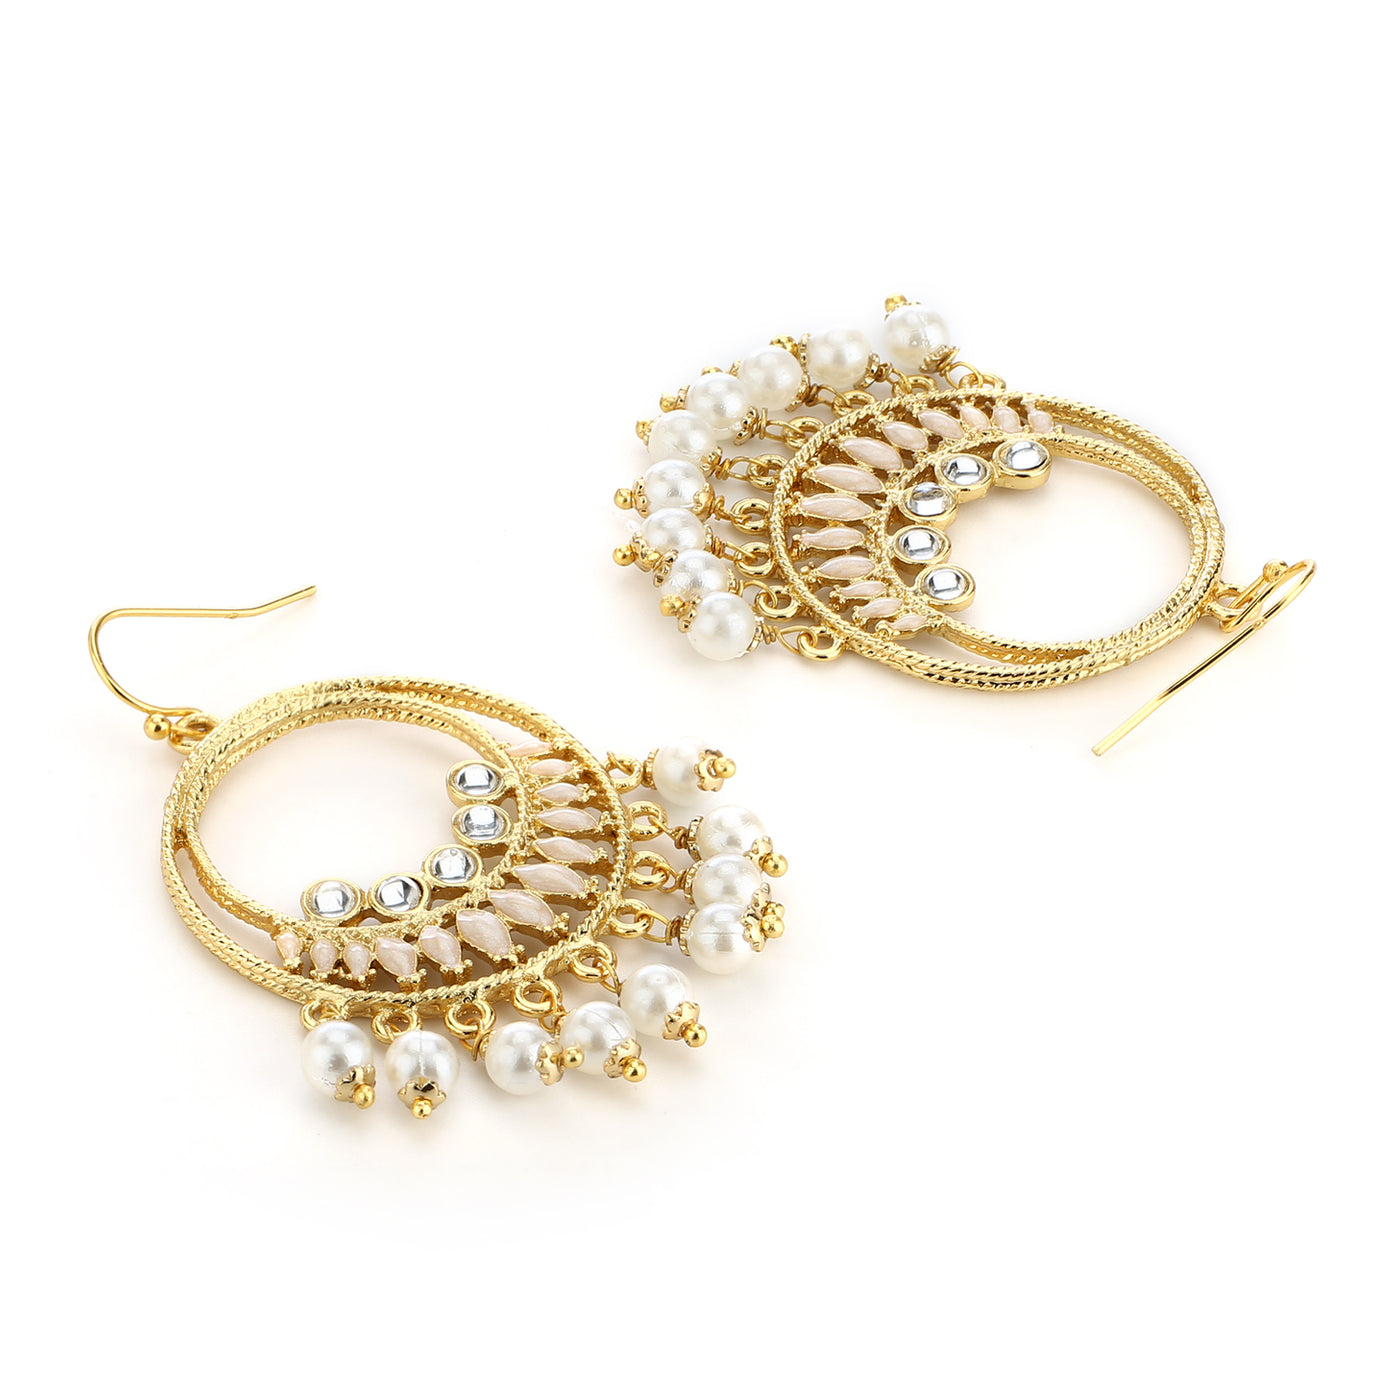 Round Hoops With White Beds Drop earrings